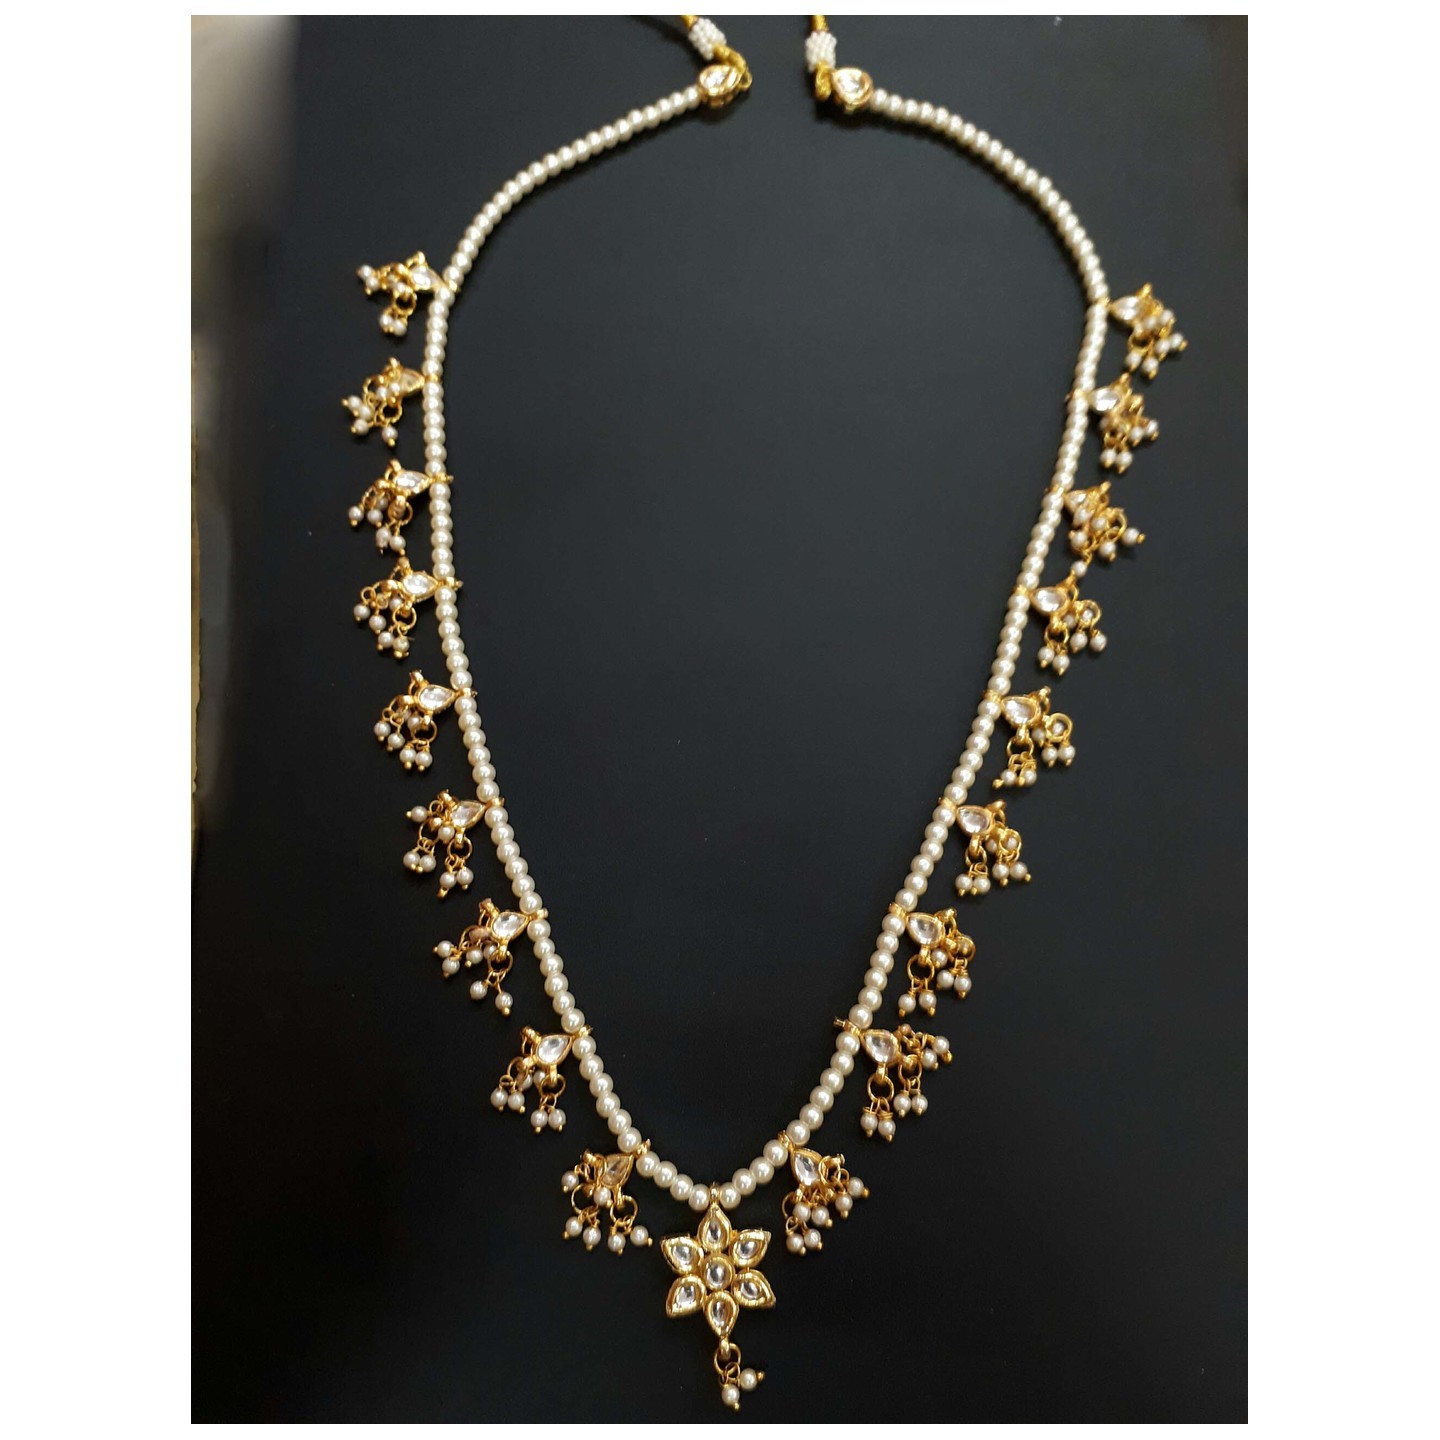 Gold Tone Kundan Necklace With White Pearls